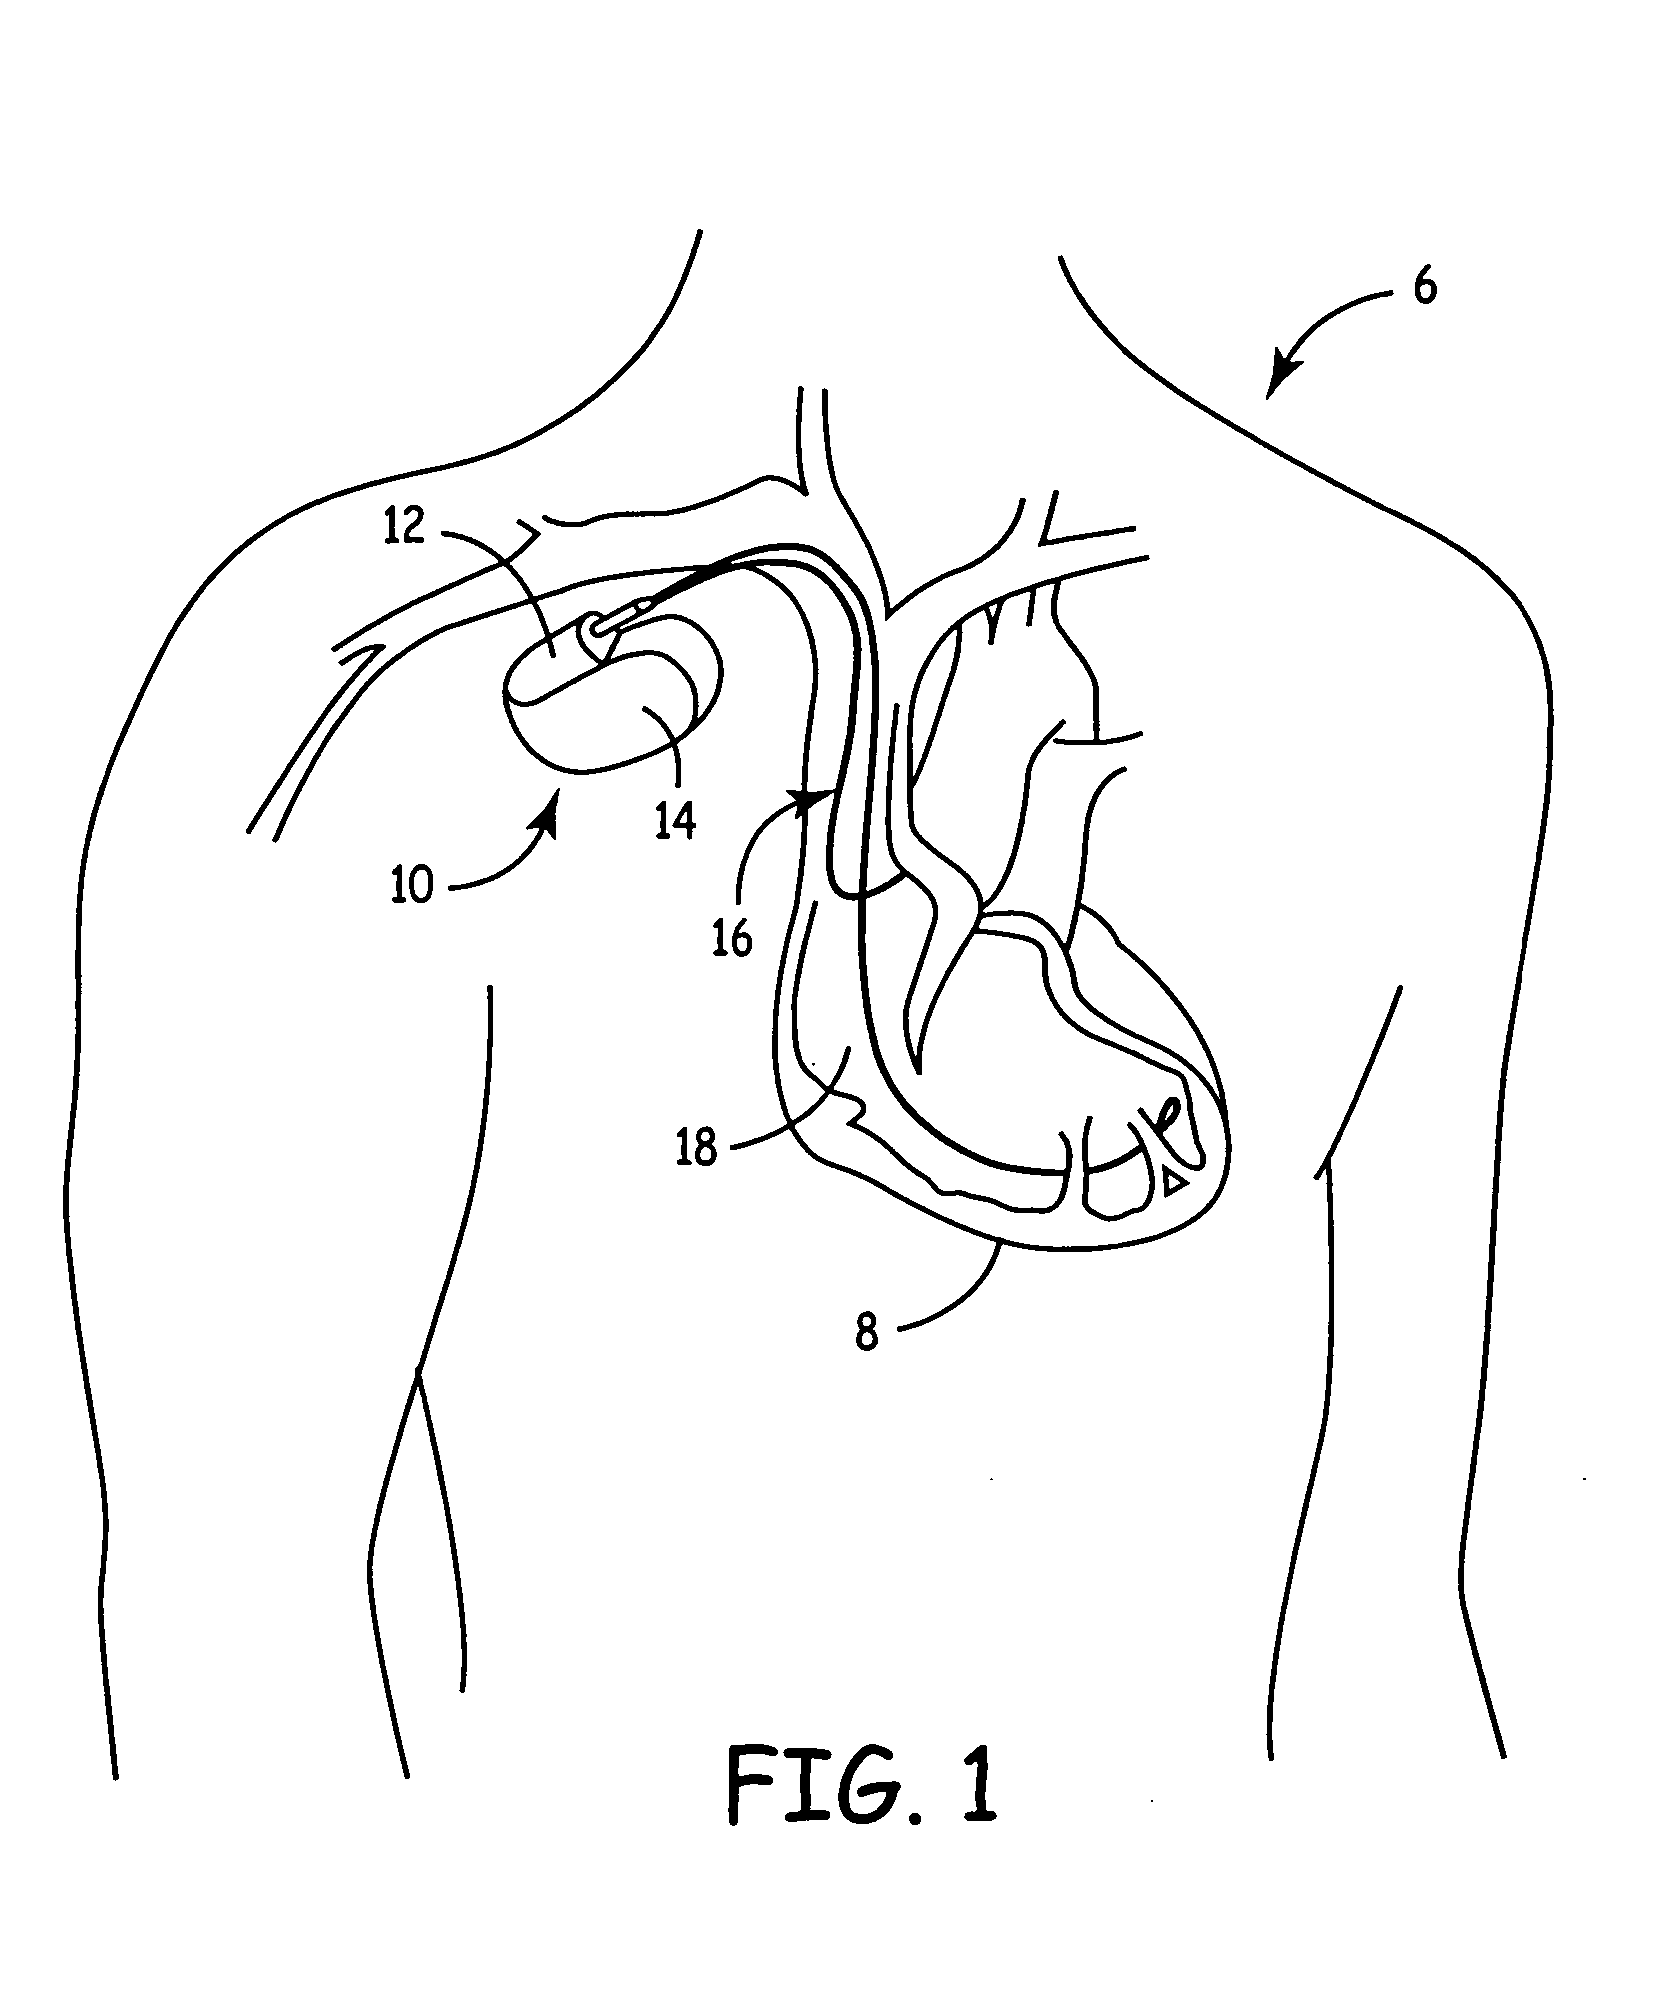 Implantable medical device with ventricular pacing protocol including progressive conduction search